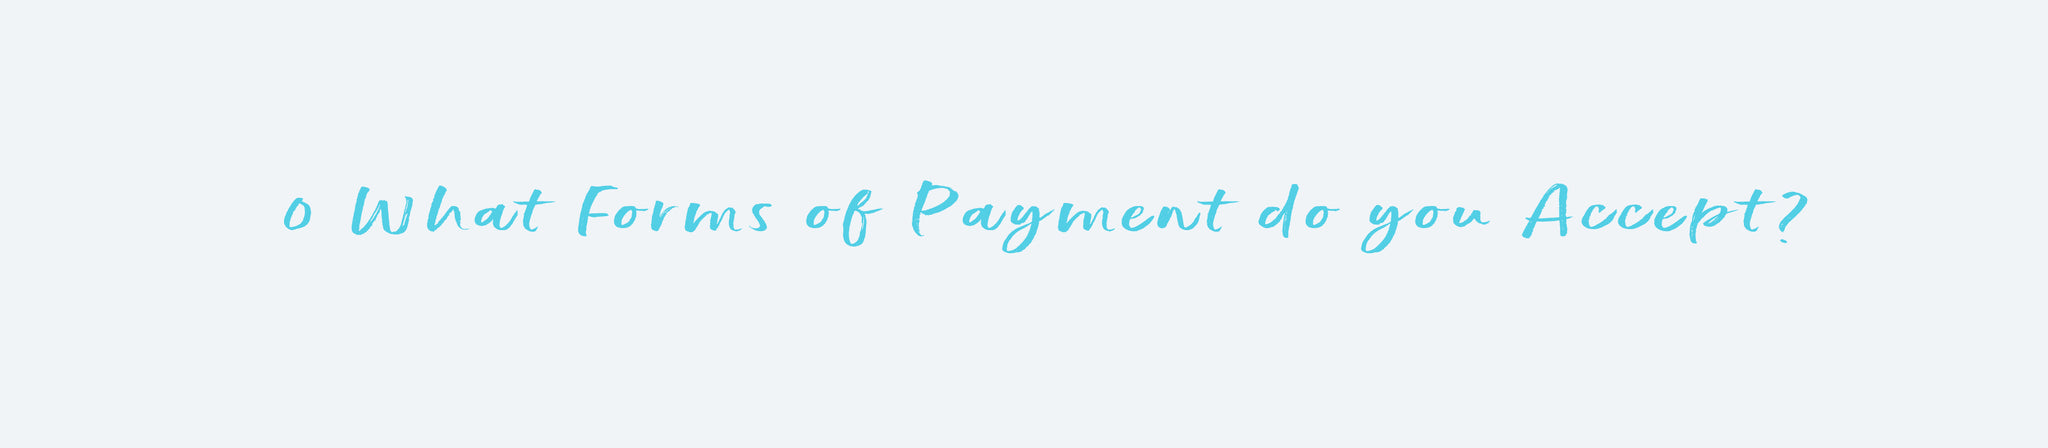 FAQ Payments Accepted SeaHouse Imagery